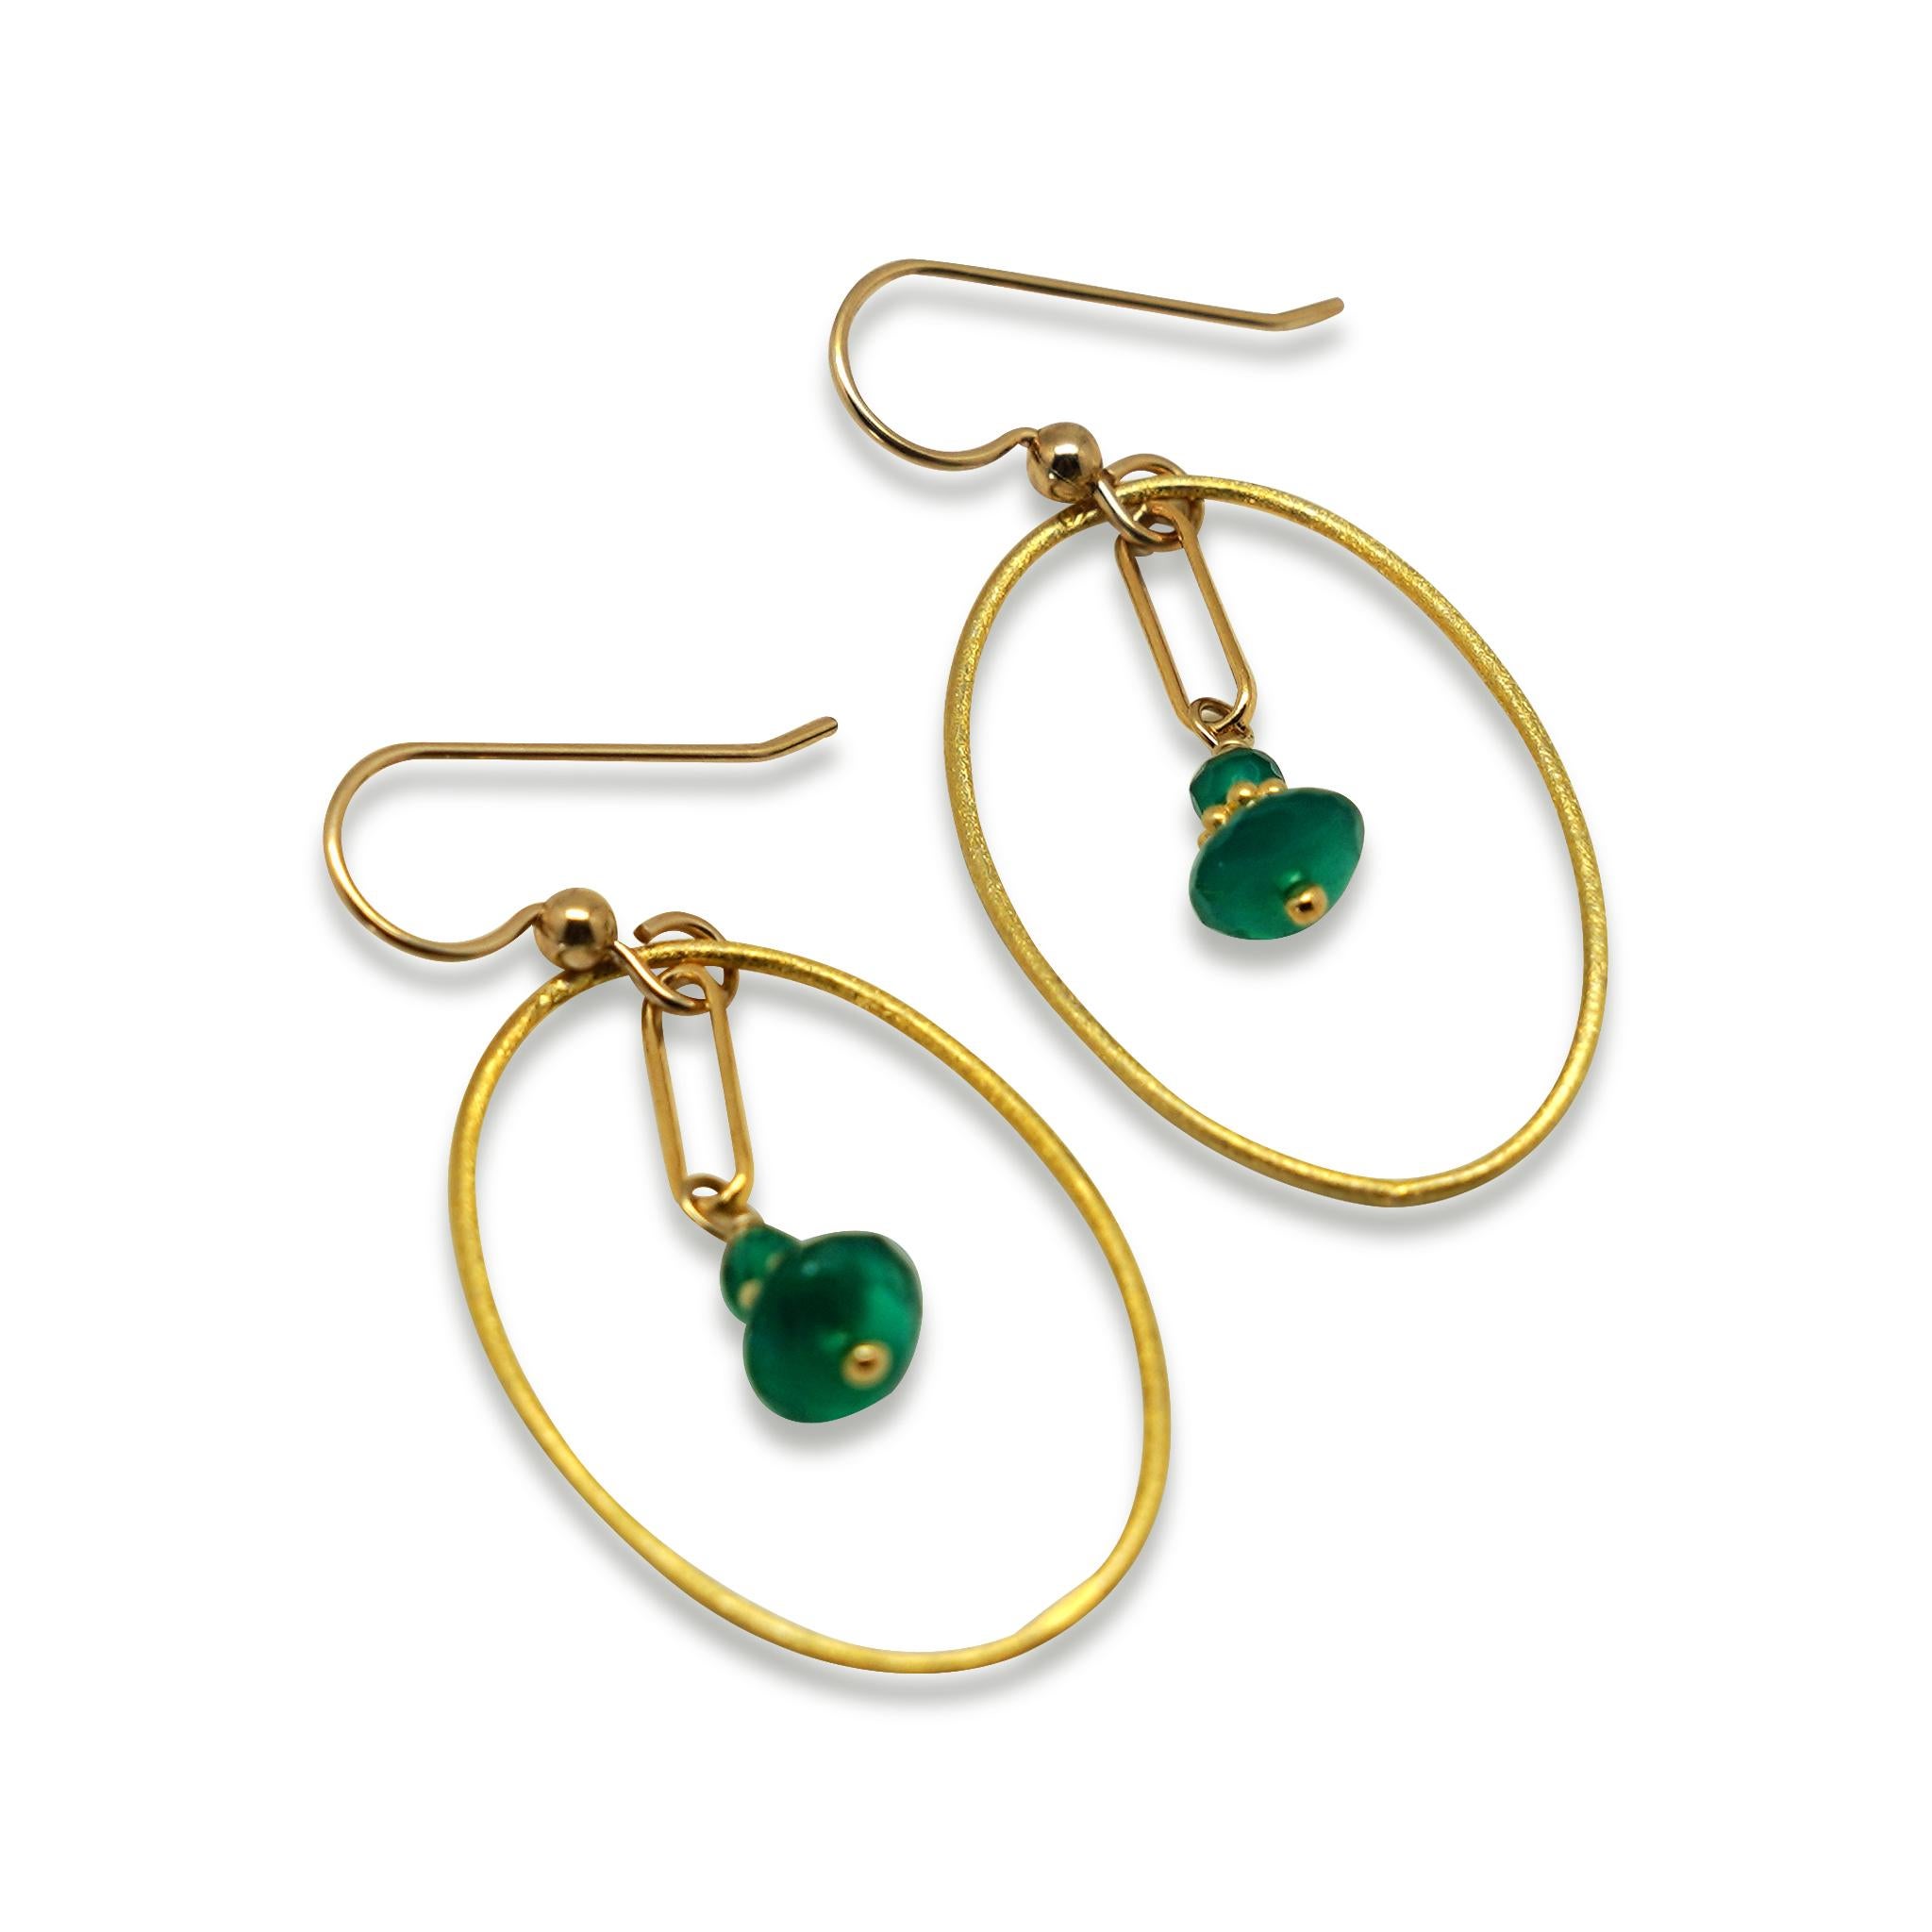 Story behind the jewelry
Green Earth earrings are comprised of oval 14K Gold earrings with green agate accents.  The rich green agate stone reminds us of what our beautiful earth and our green nature bring us. 
Designed and made in Newport Beach,